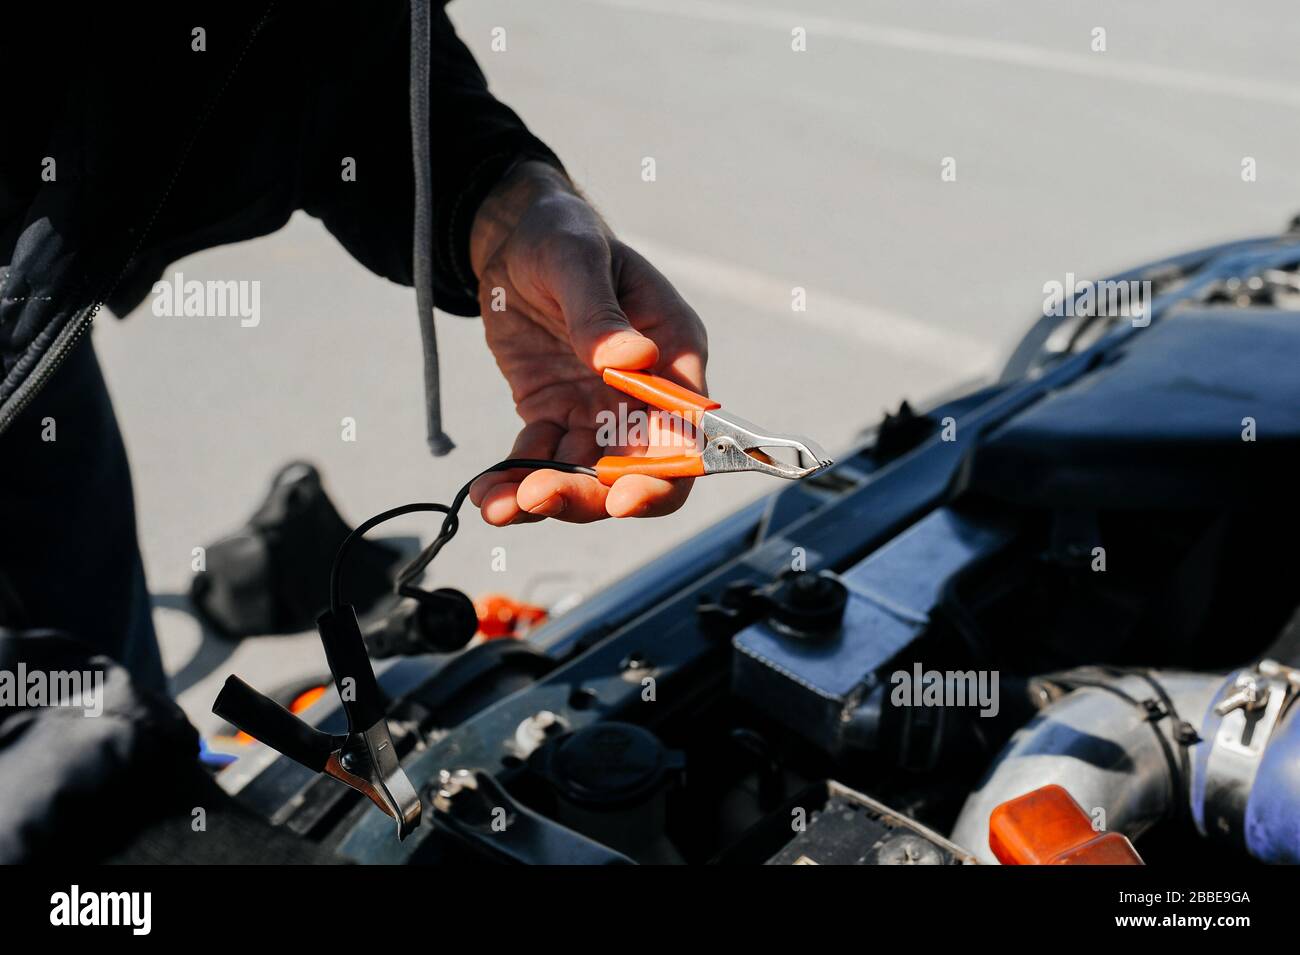 the hand connects the tongs red terminal to the battery of a car with an open hood and tuned parts of the car Stock Photo